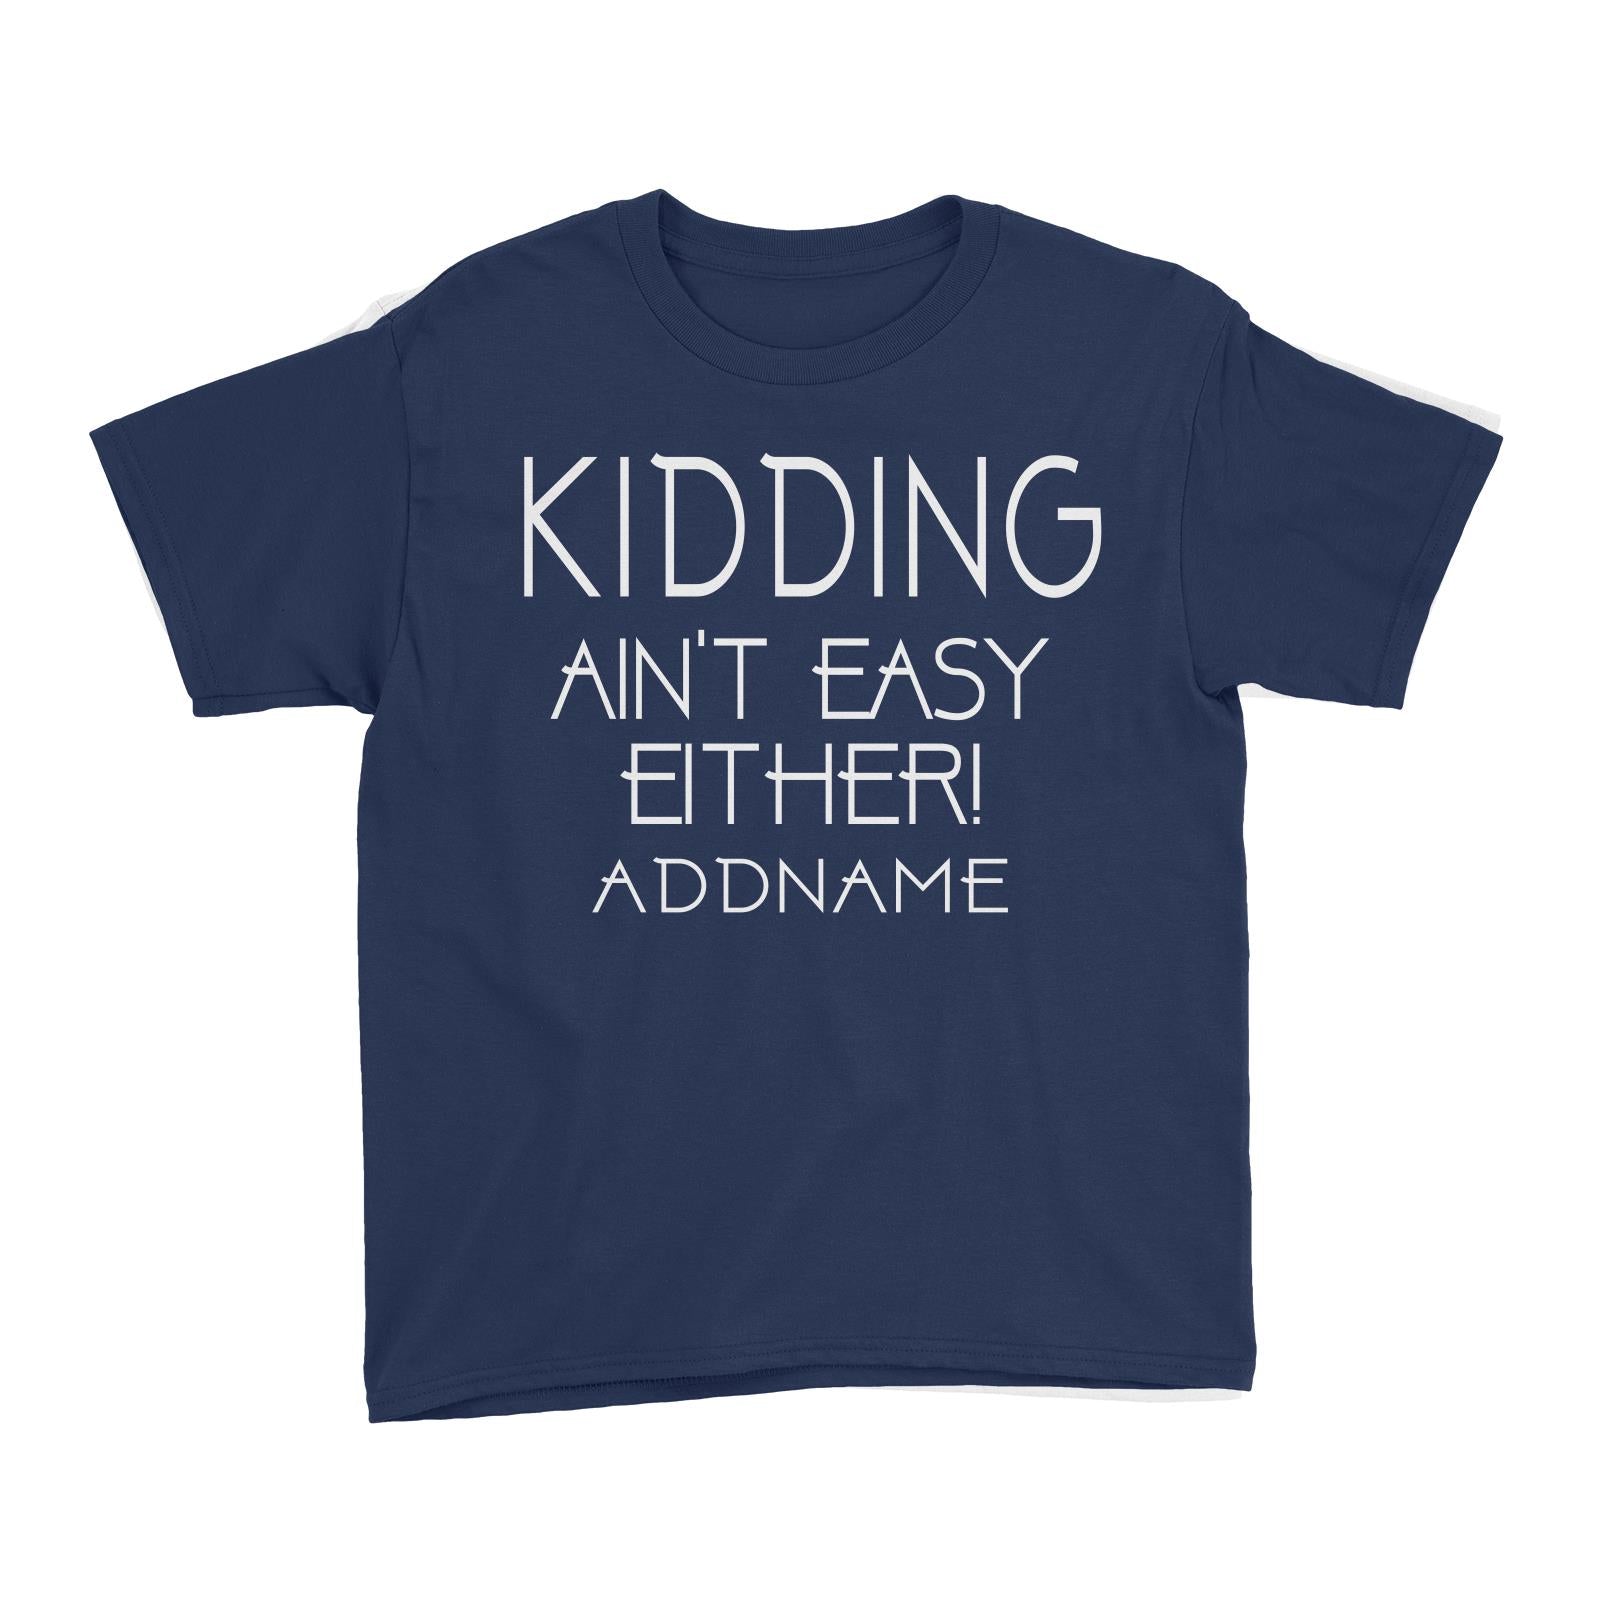 Kidding Aint Easy Either Kid's T-Shirt